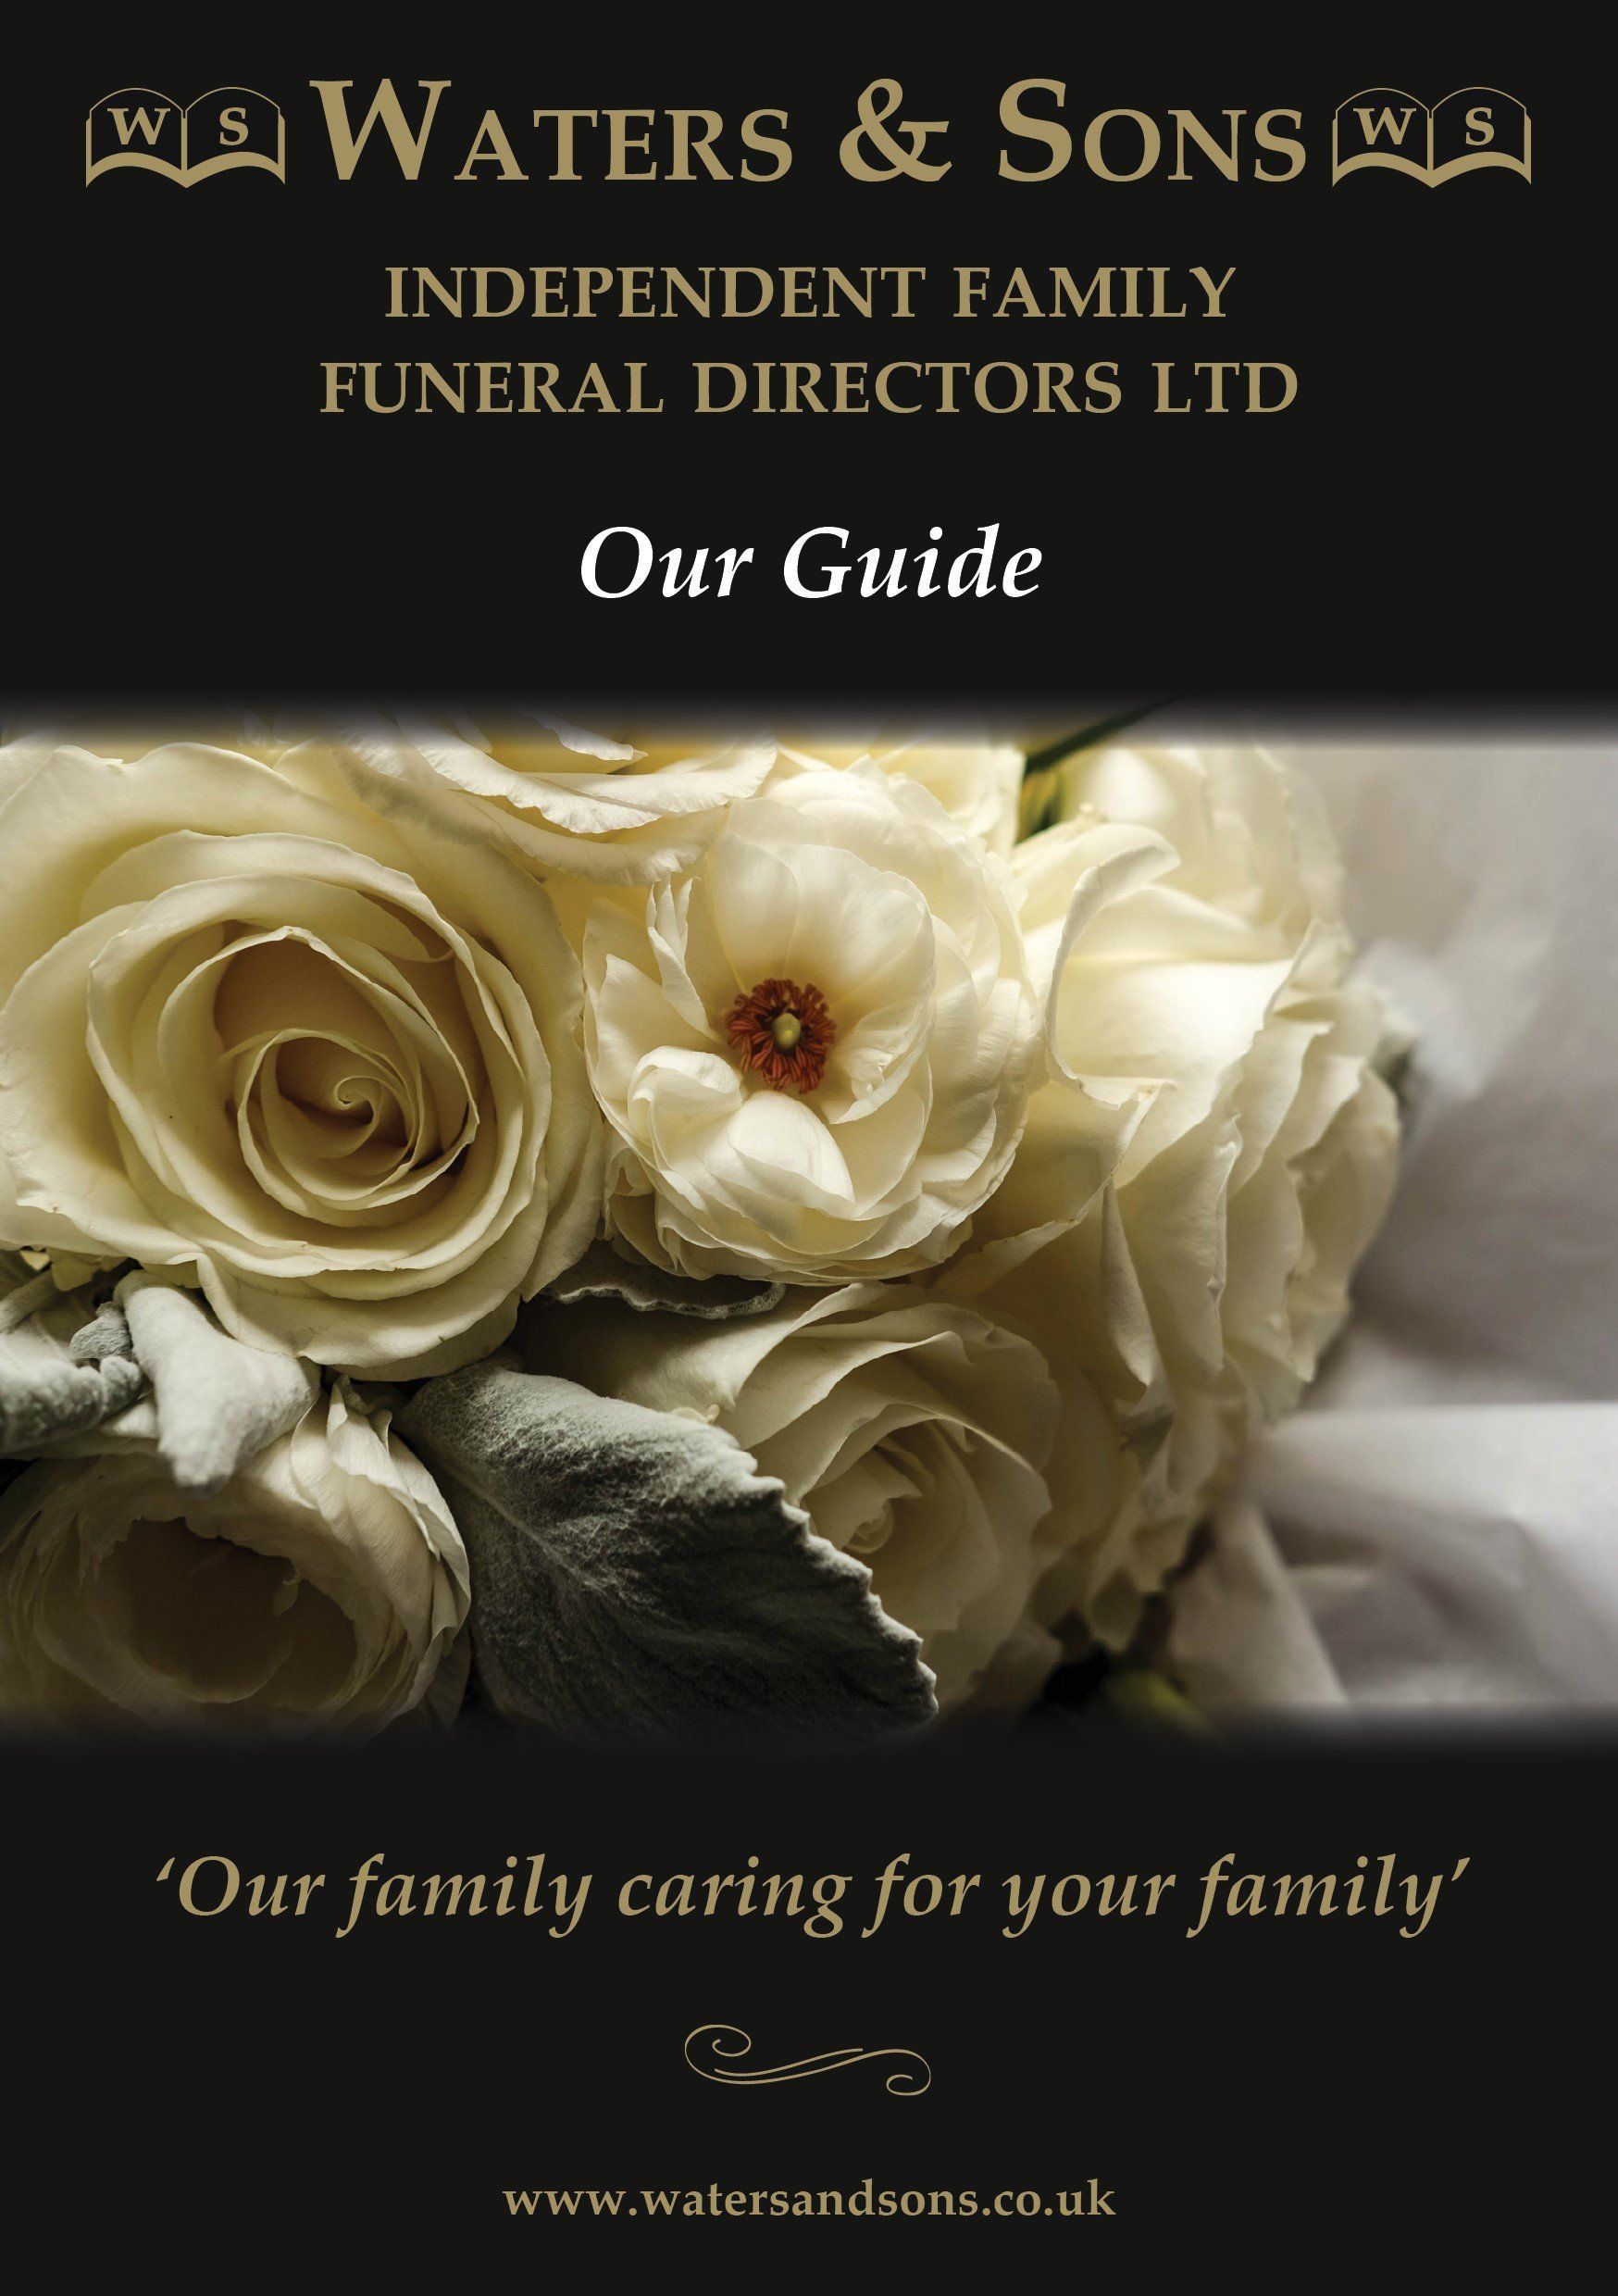 Our Guide Brochure